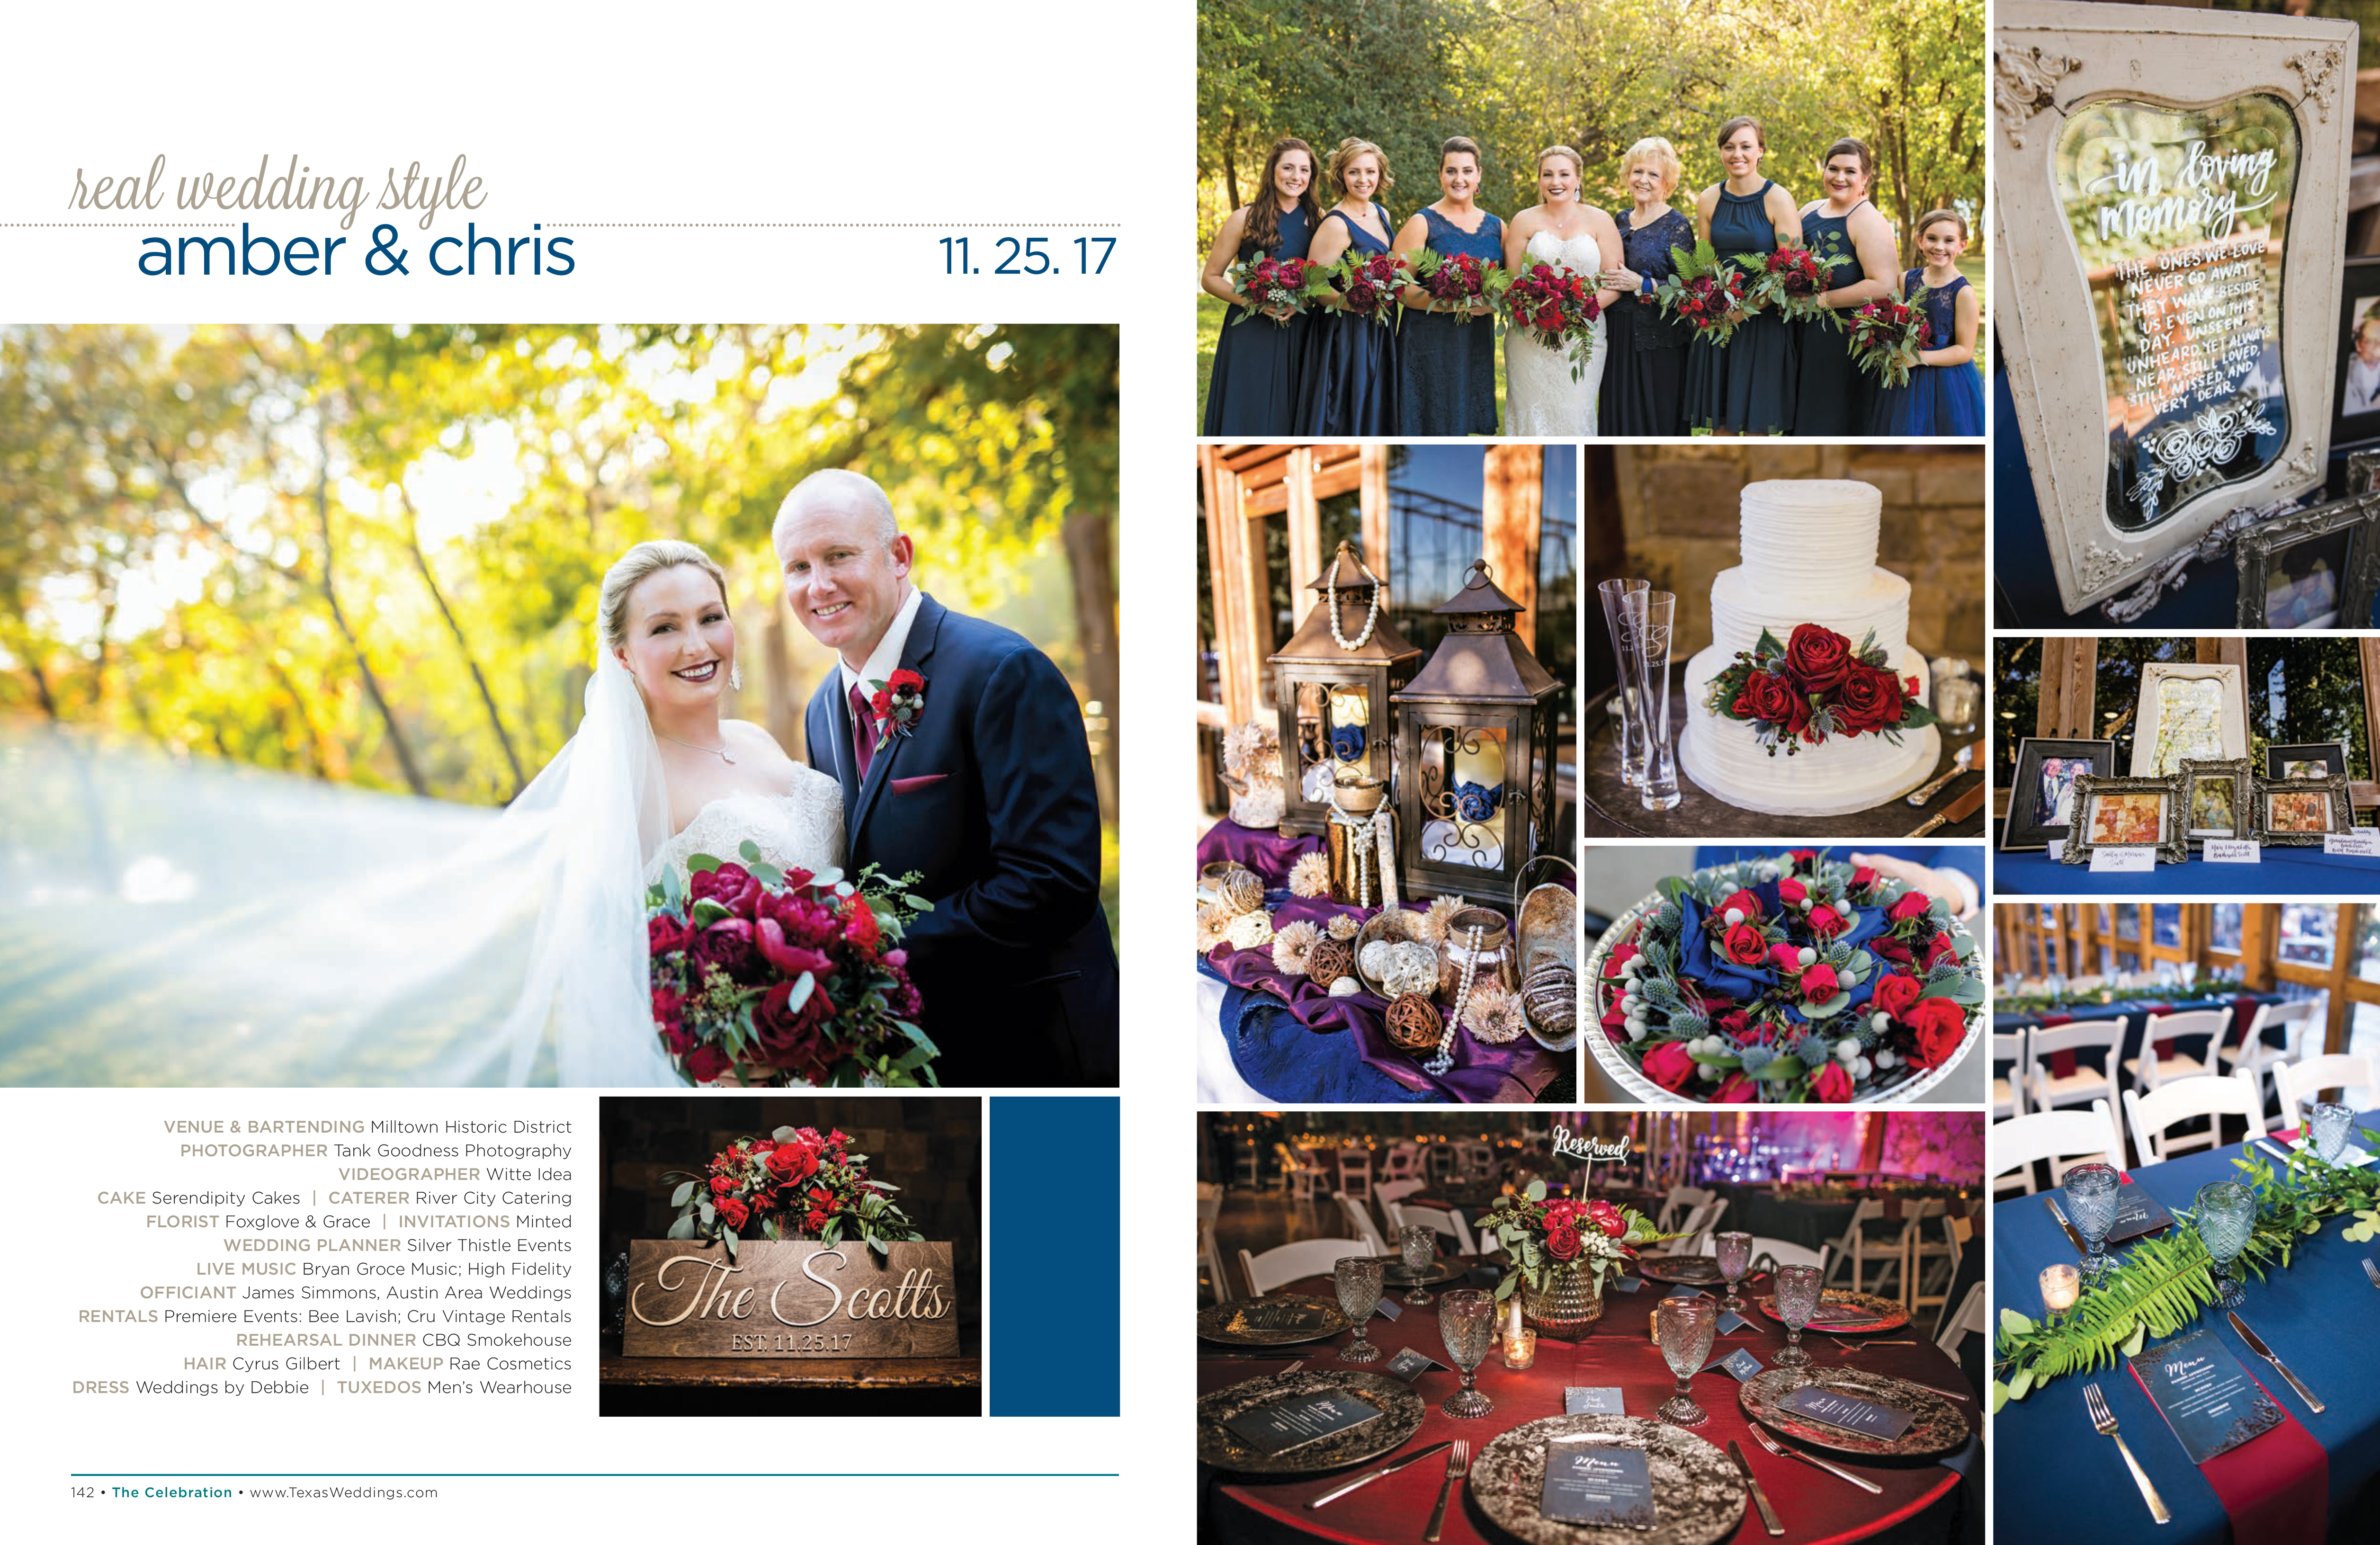 Amber & Chris in their Real Wedding Page in the Spring/Summer 2018 Texas Wedding Guide